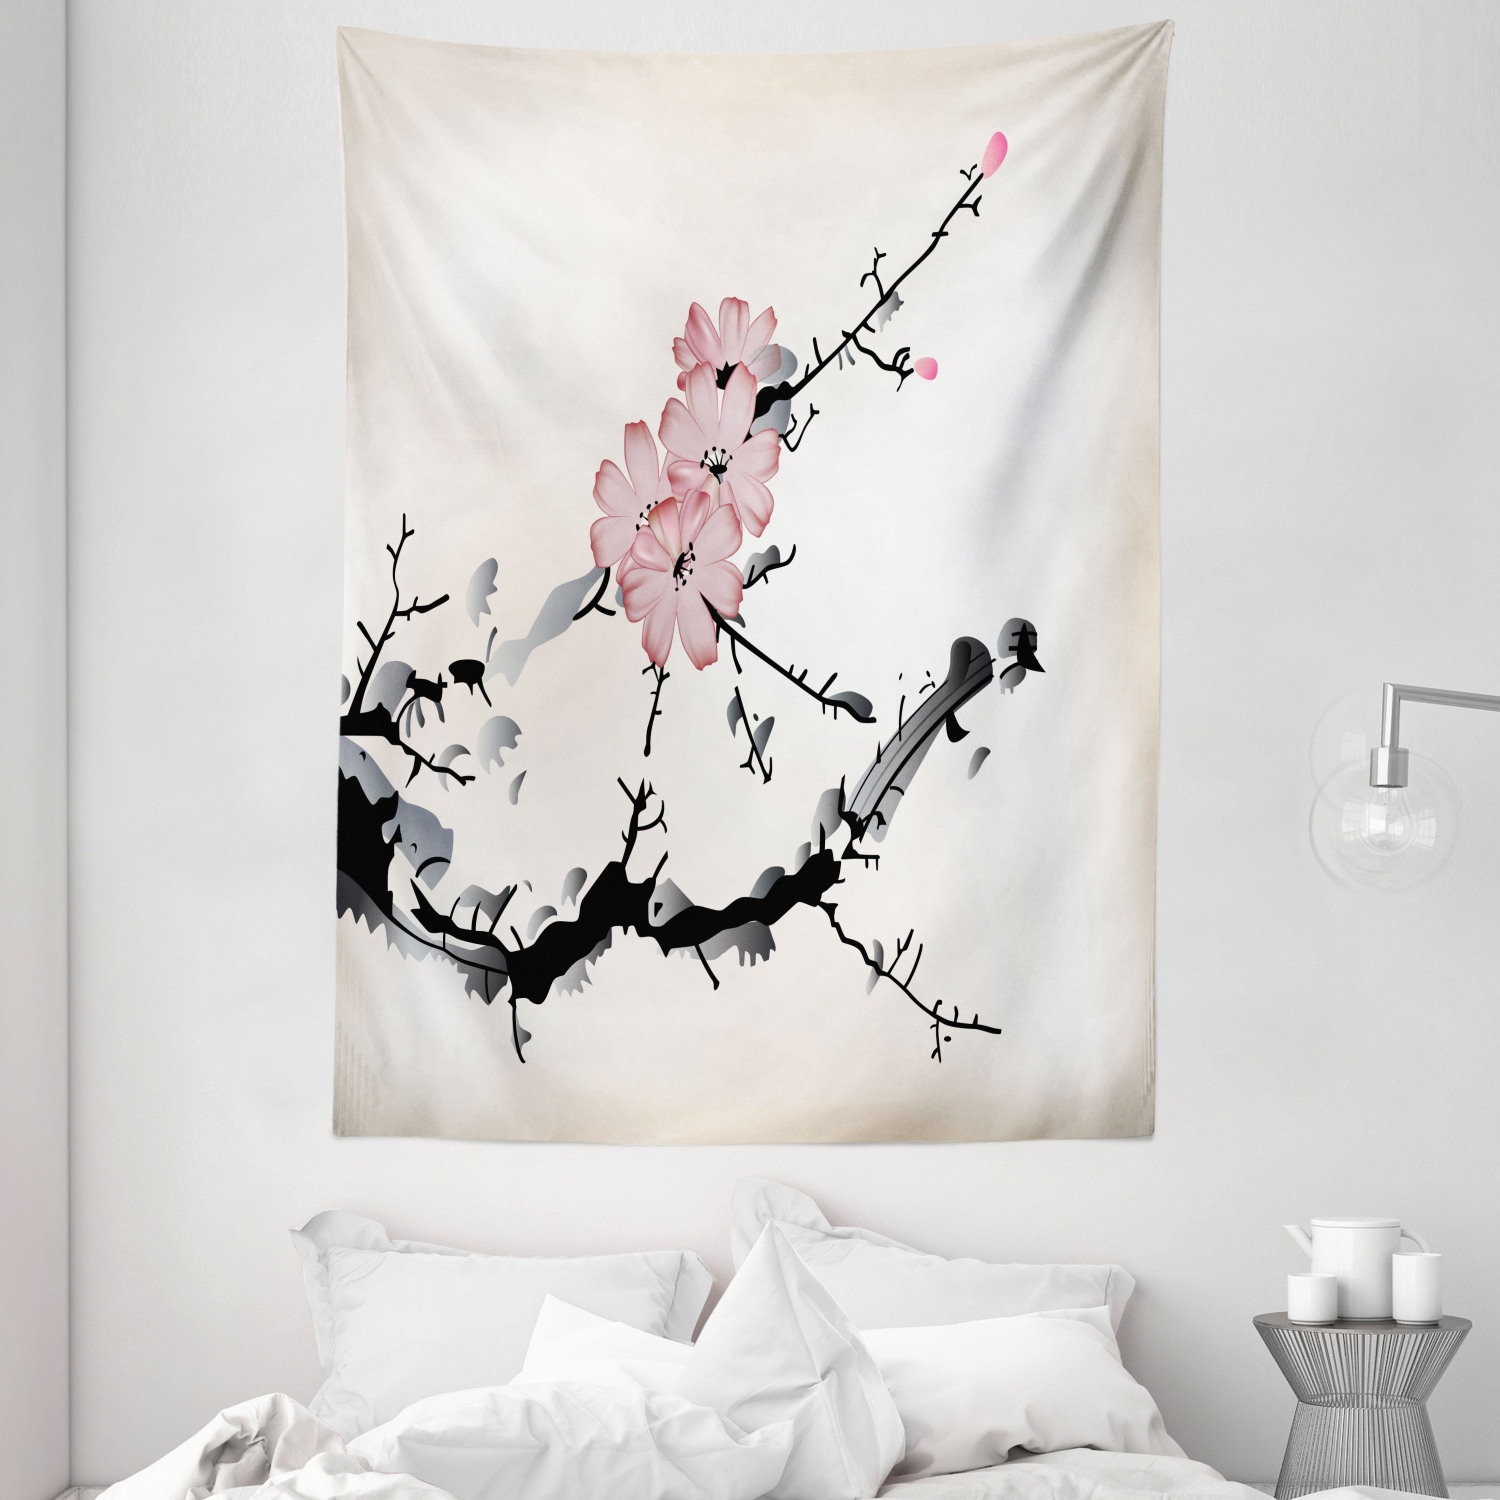 Ambesonne Japanese Tapestry, Watercolors Illustration Traditional Native Blossoming Floral Temperate Zone Plant, Wall Hanging for Bedroom Living Room Dorm Decor